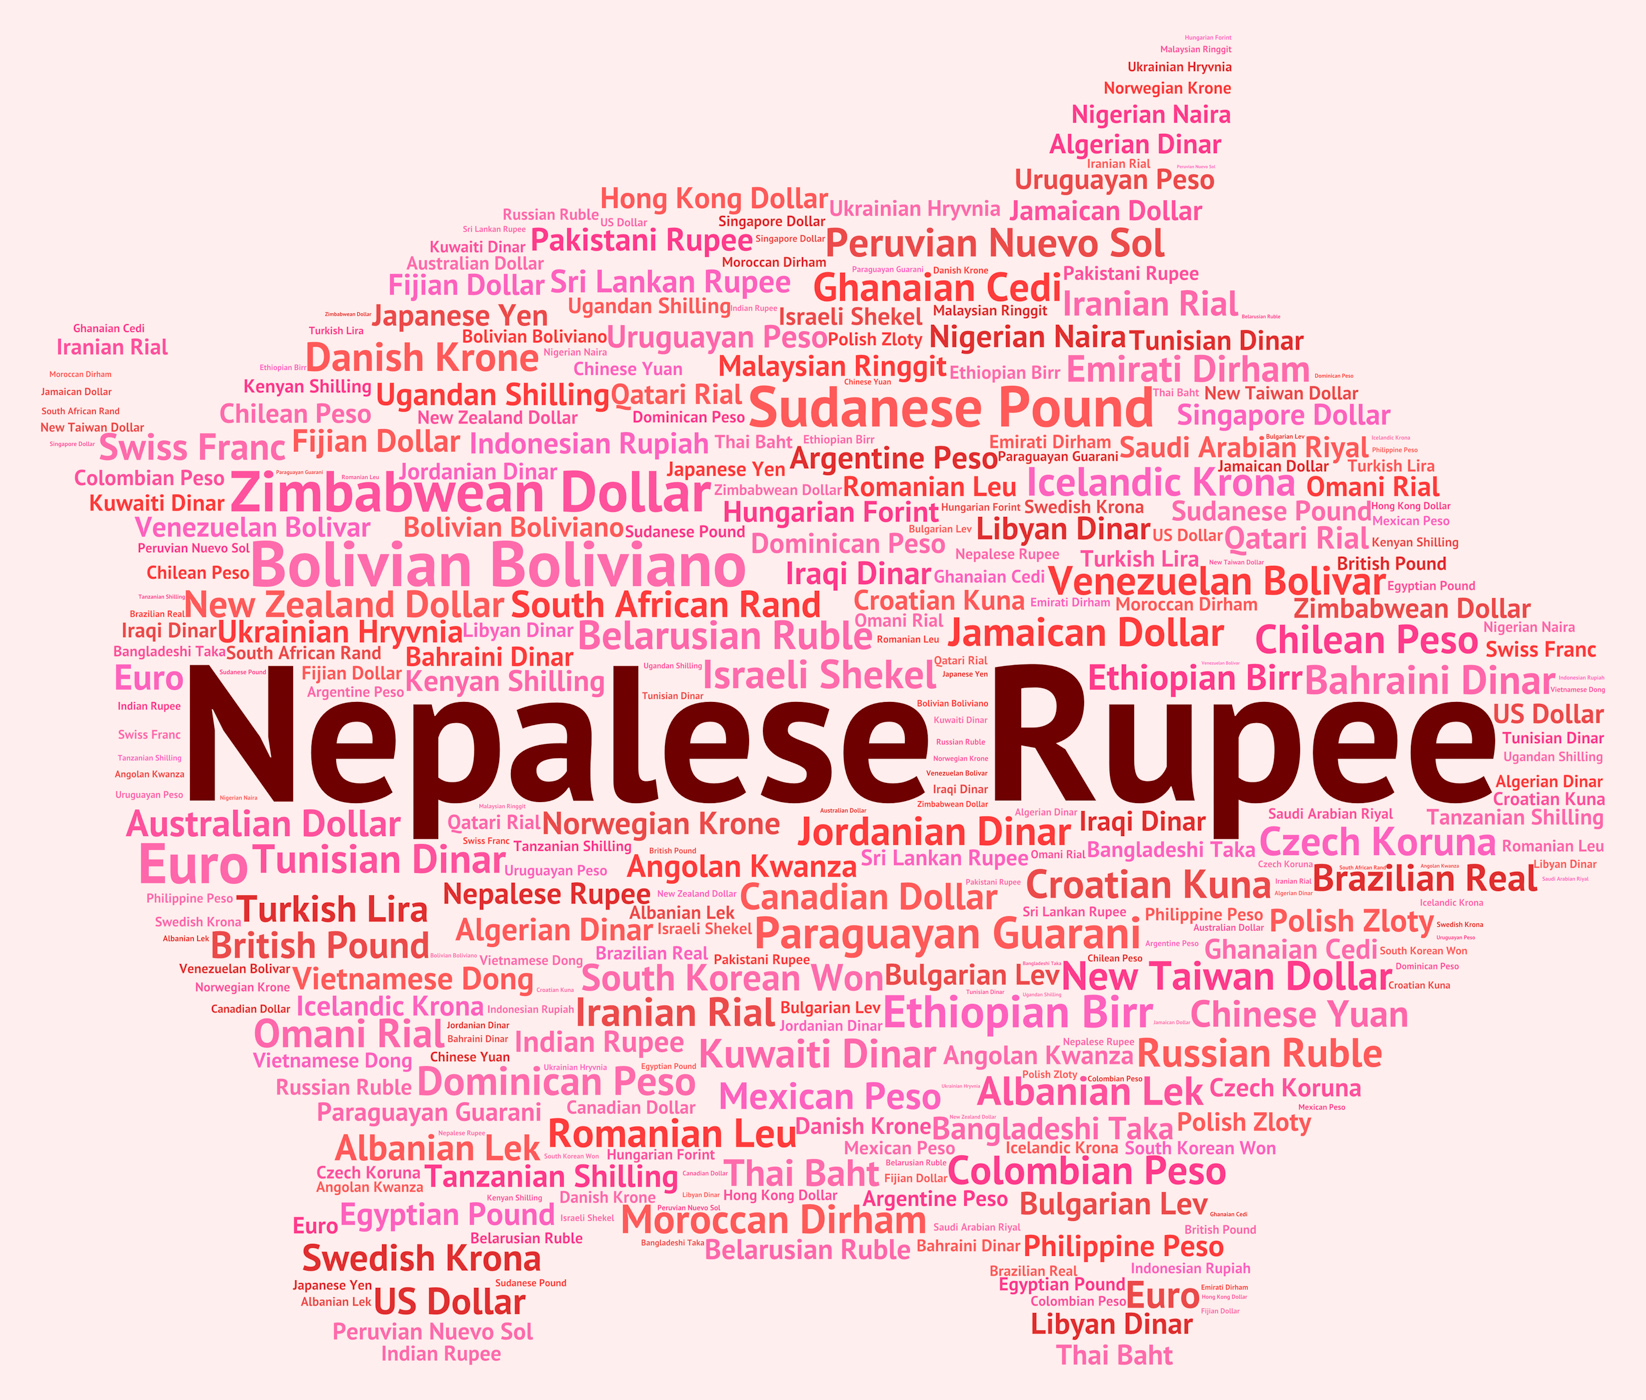 Nepalese rupee represents currency exchange and coinage photo